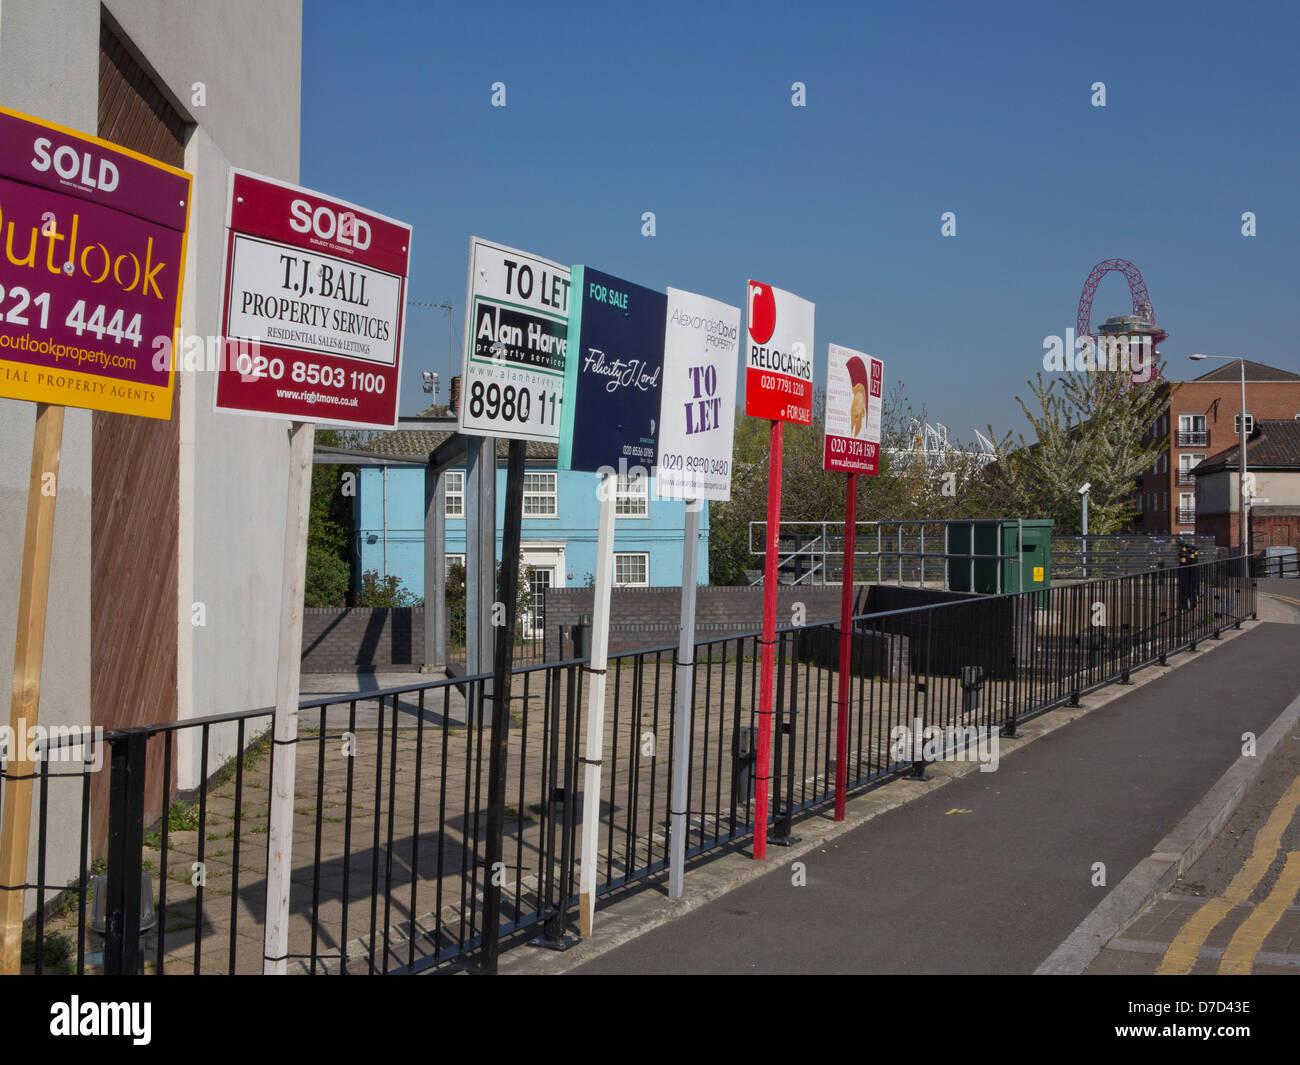 For sale and to let property signs in Stratford by the London 2012 Queen Elizabeth II Olympic Park Stock Photo